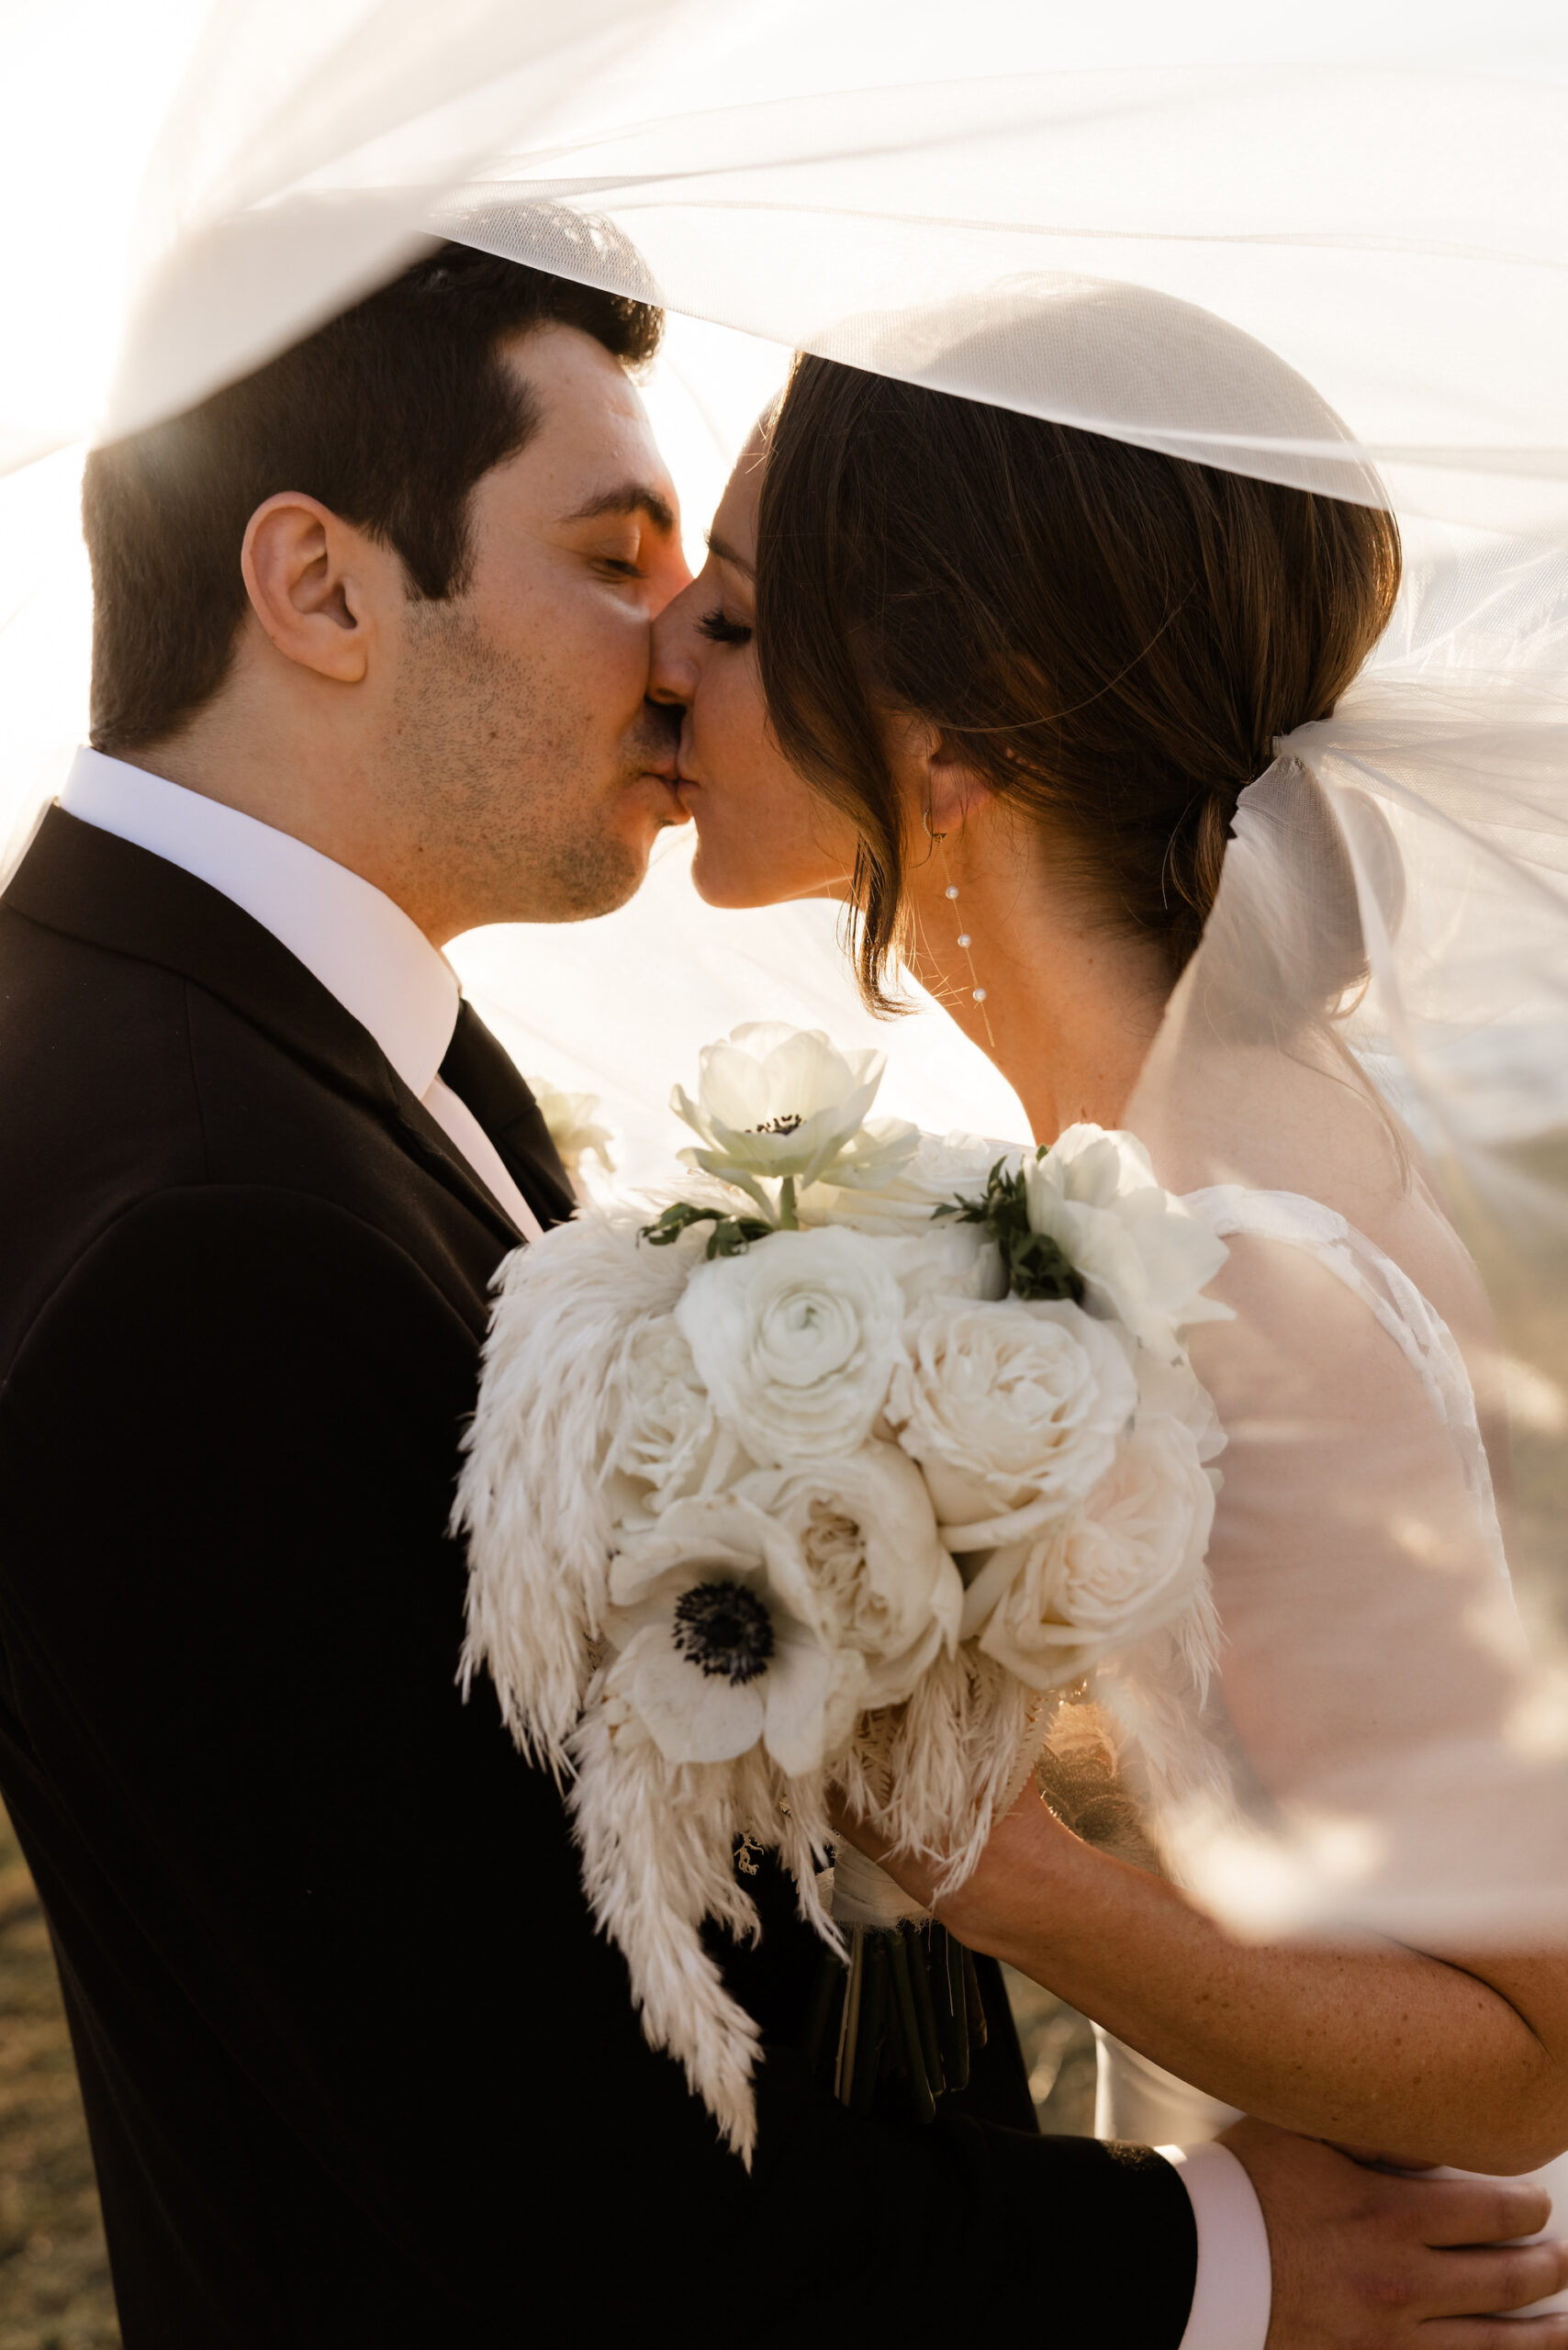 Classic Bridal Bouquet with White Feathers, Garden Roses, and Anemone | Romantic Bride and Groom Veil Portrait | Sarasota Wedding Photographer Garry and Stacy Photography Co.